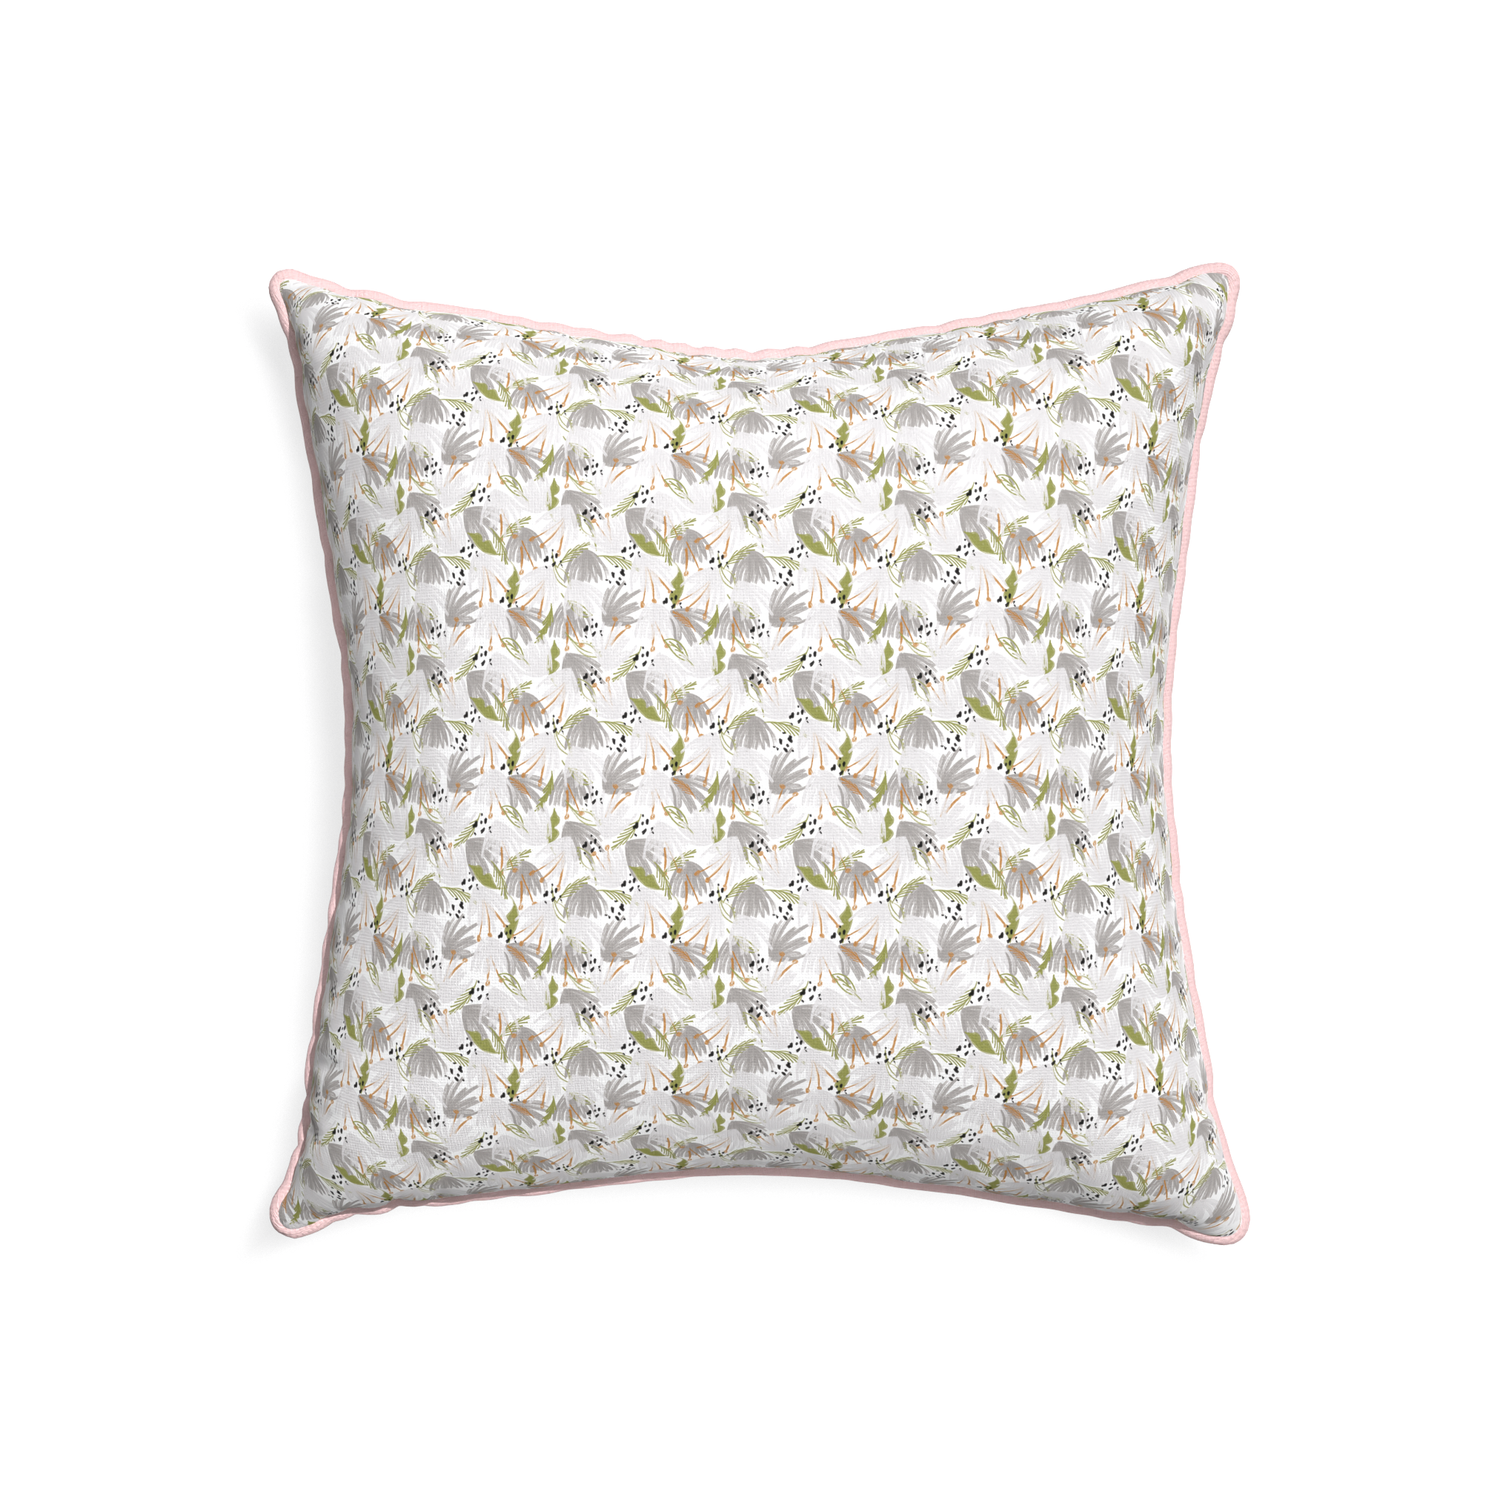 22-square eden grey custom grey floralpillow with petal piping on white background